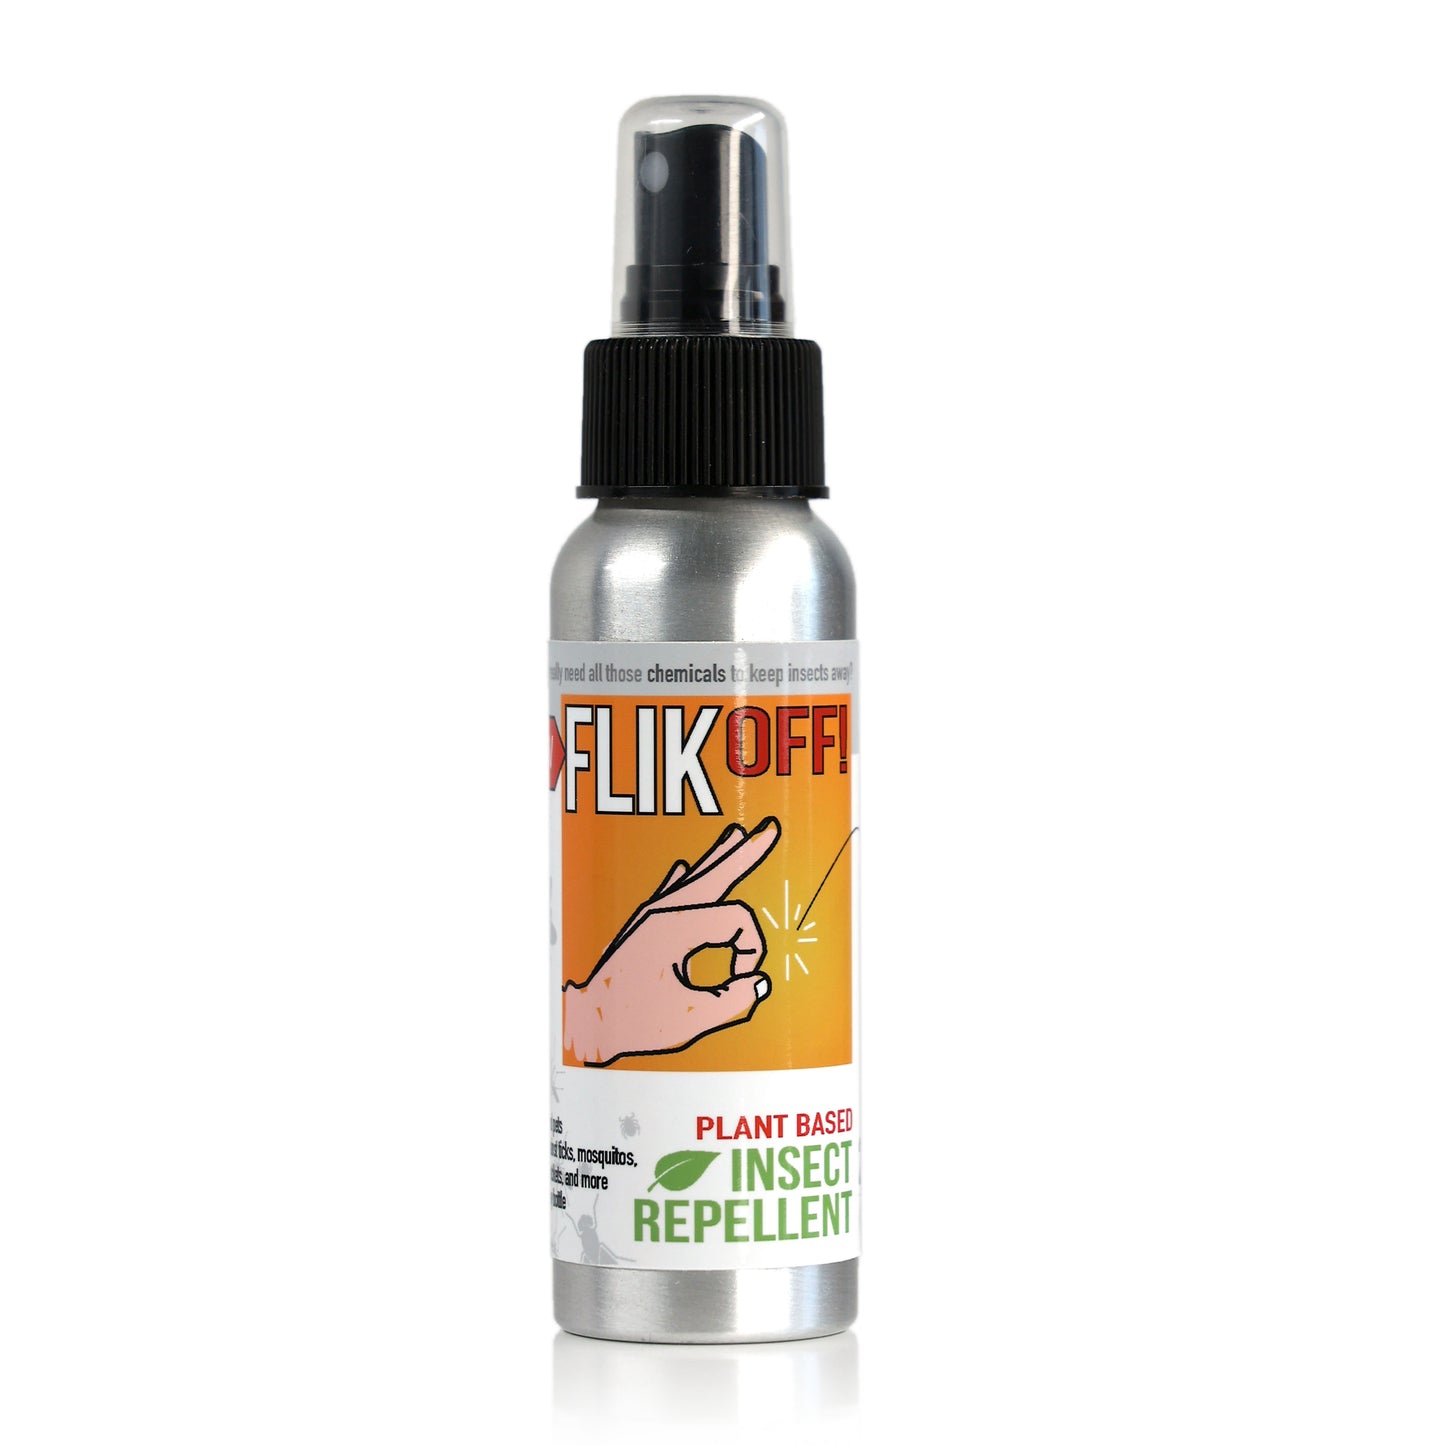 FLIK-OFF HUMAN INSECT REPELLENT EVERY PLANT defends itself against insects Gnome Wellness has captured those botanical defenses